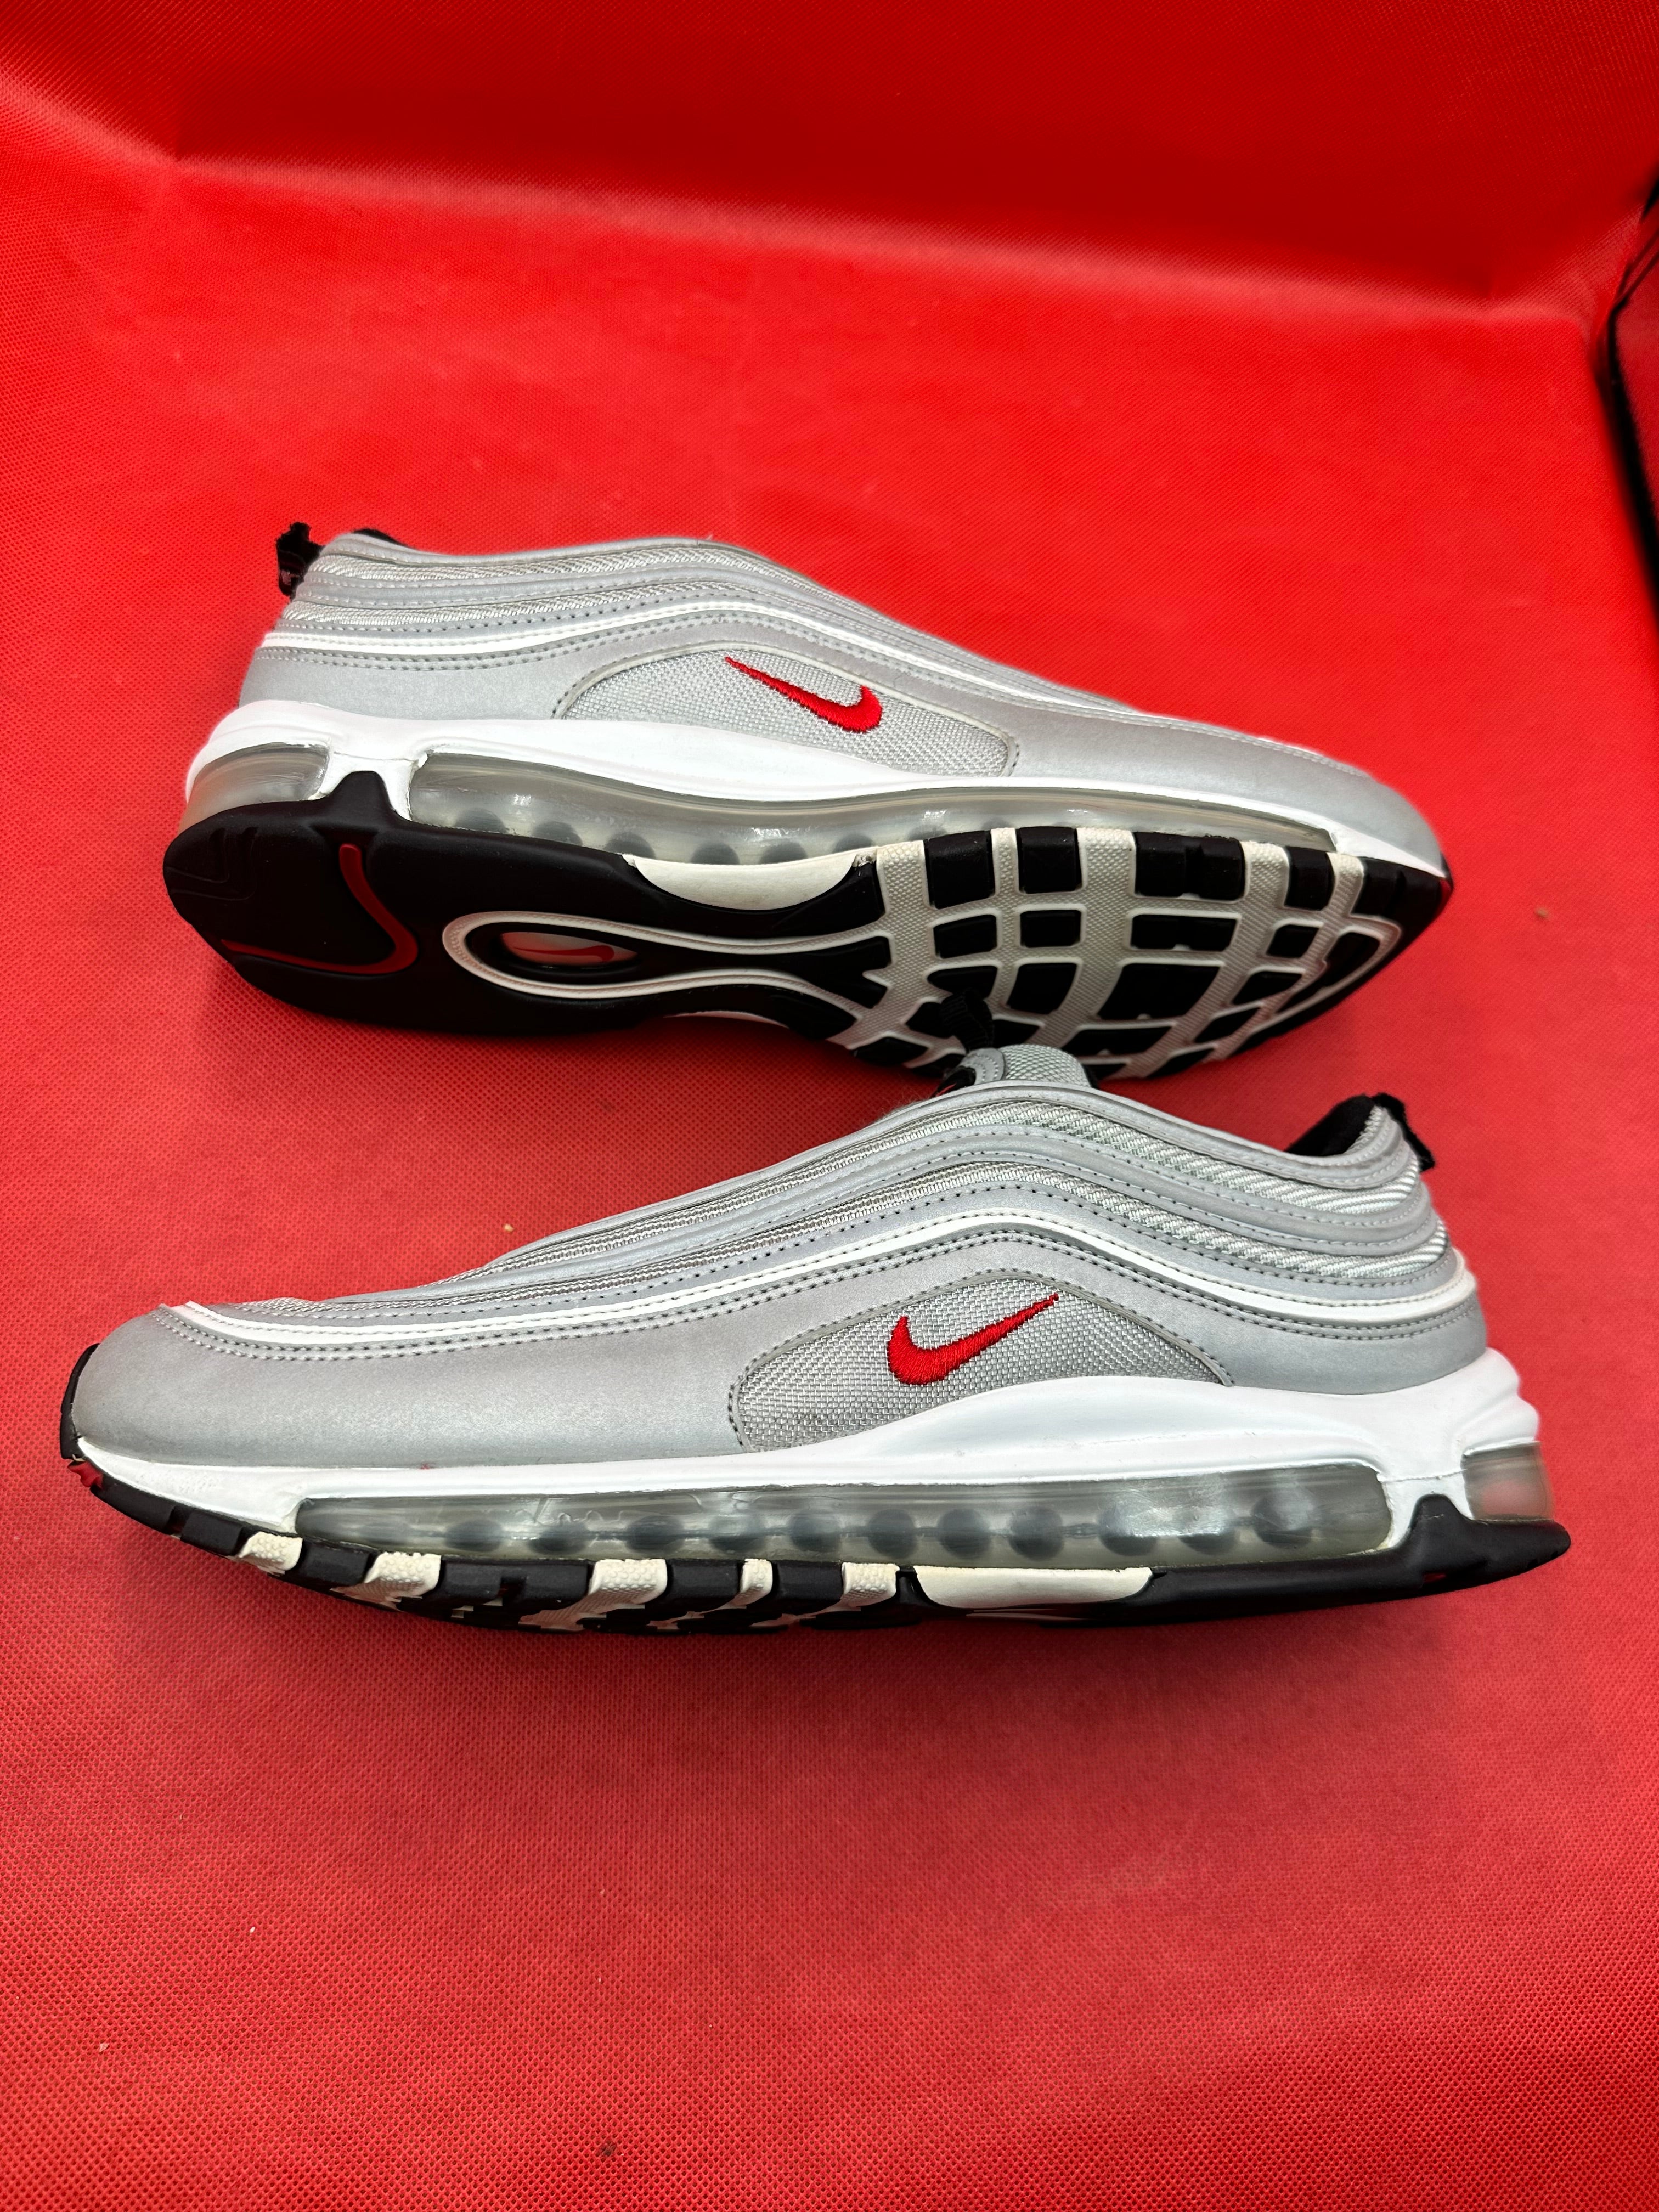 Silver Bullet Nike Air max 97s size 11